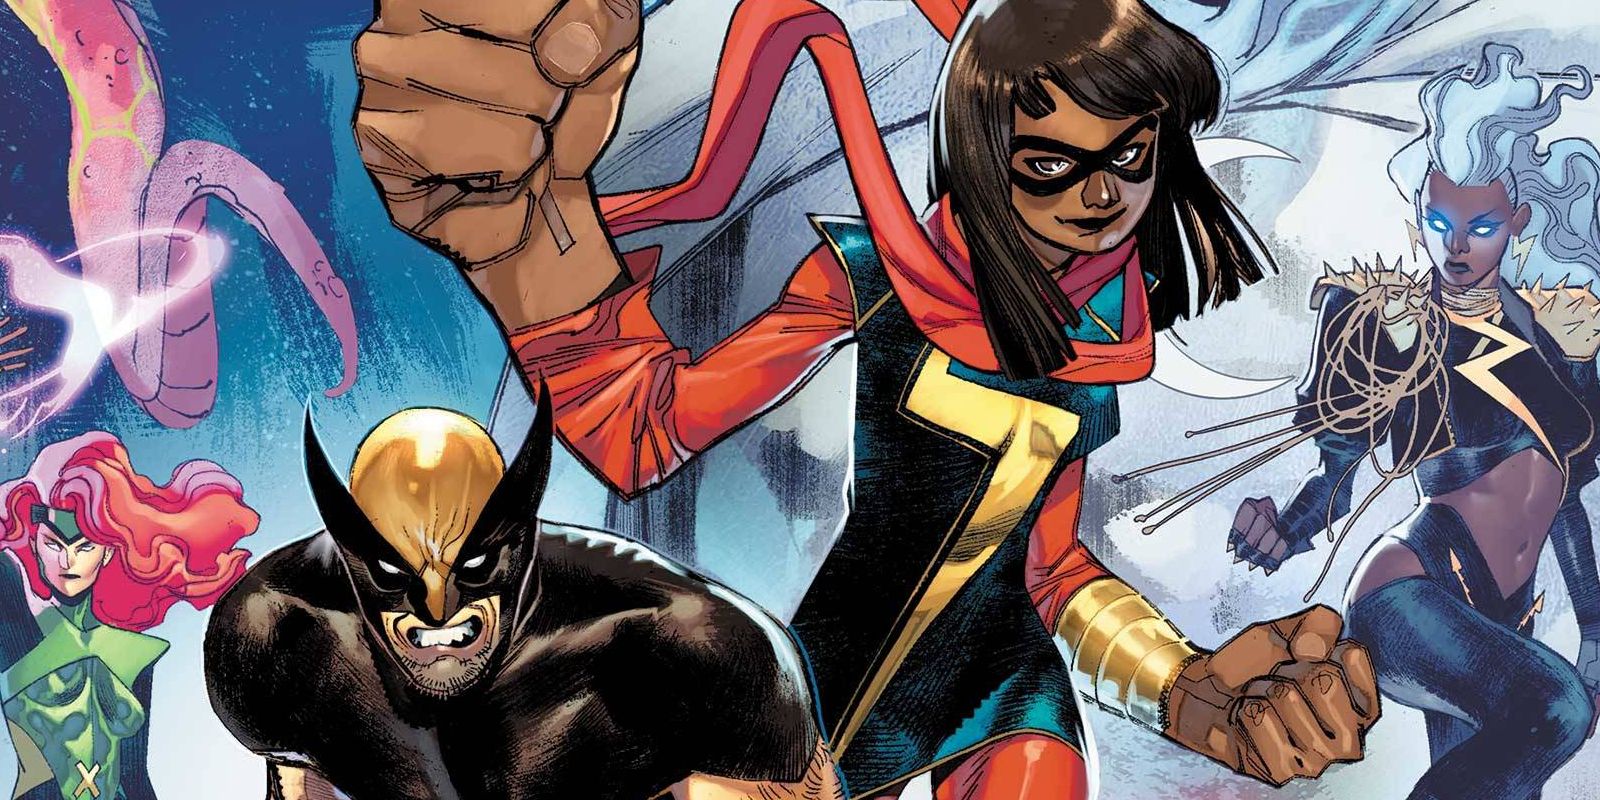 REVIEW: Marvel's Ms. Marvel & Wolverine #1